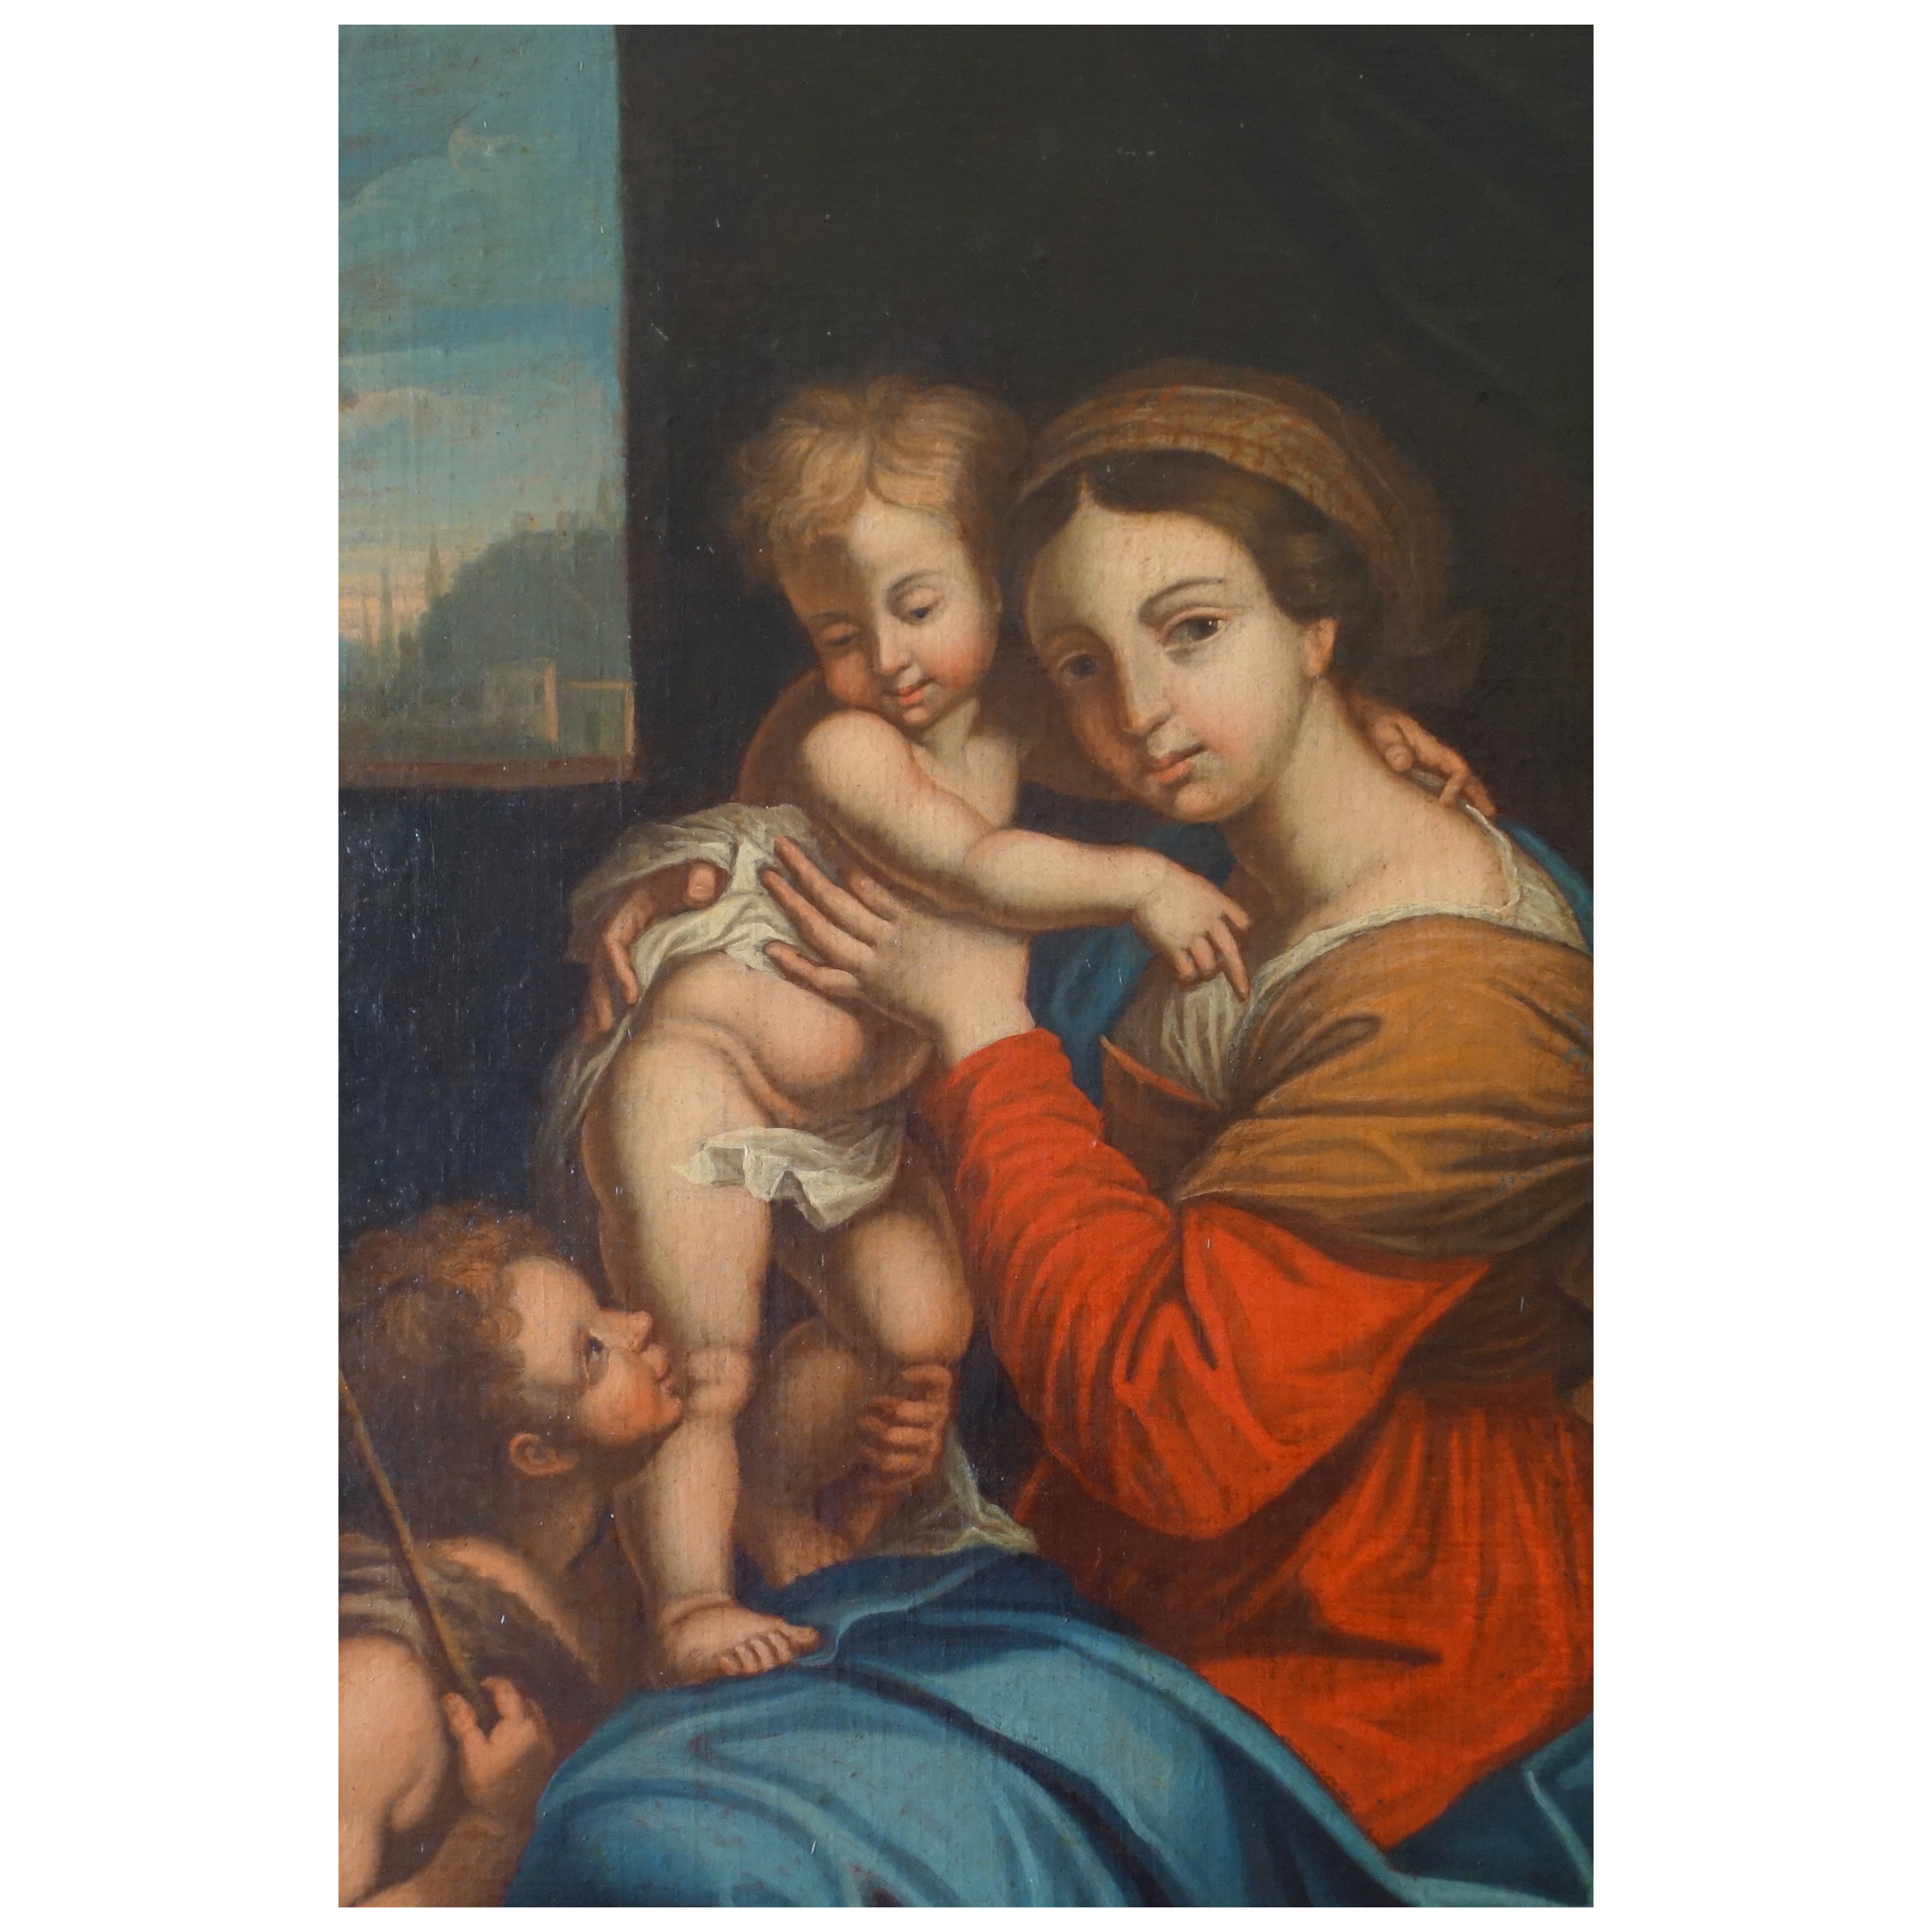 18th century French school, Virgin Mary and Jesus Child painting after Raphael